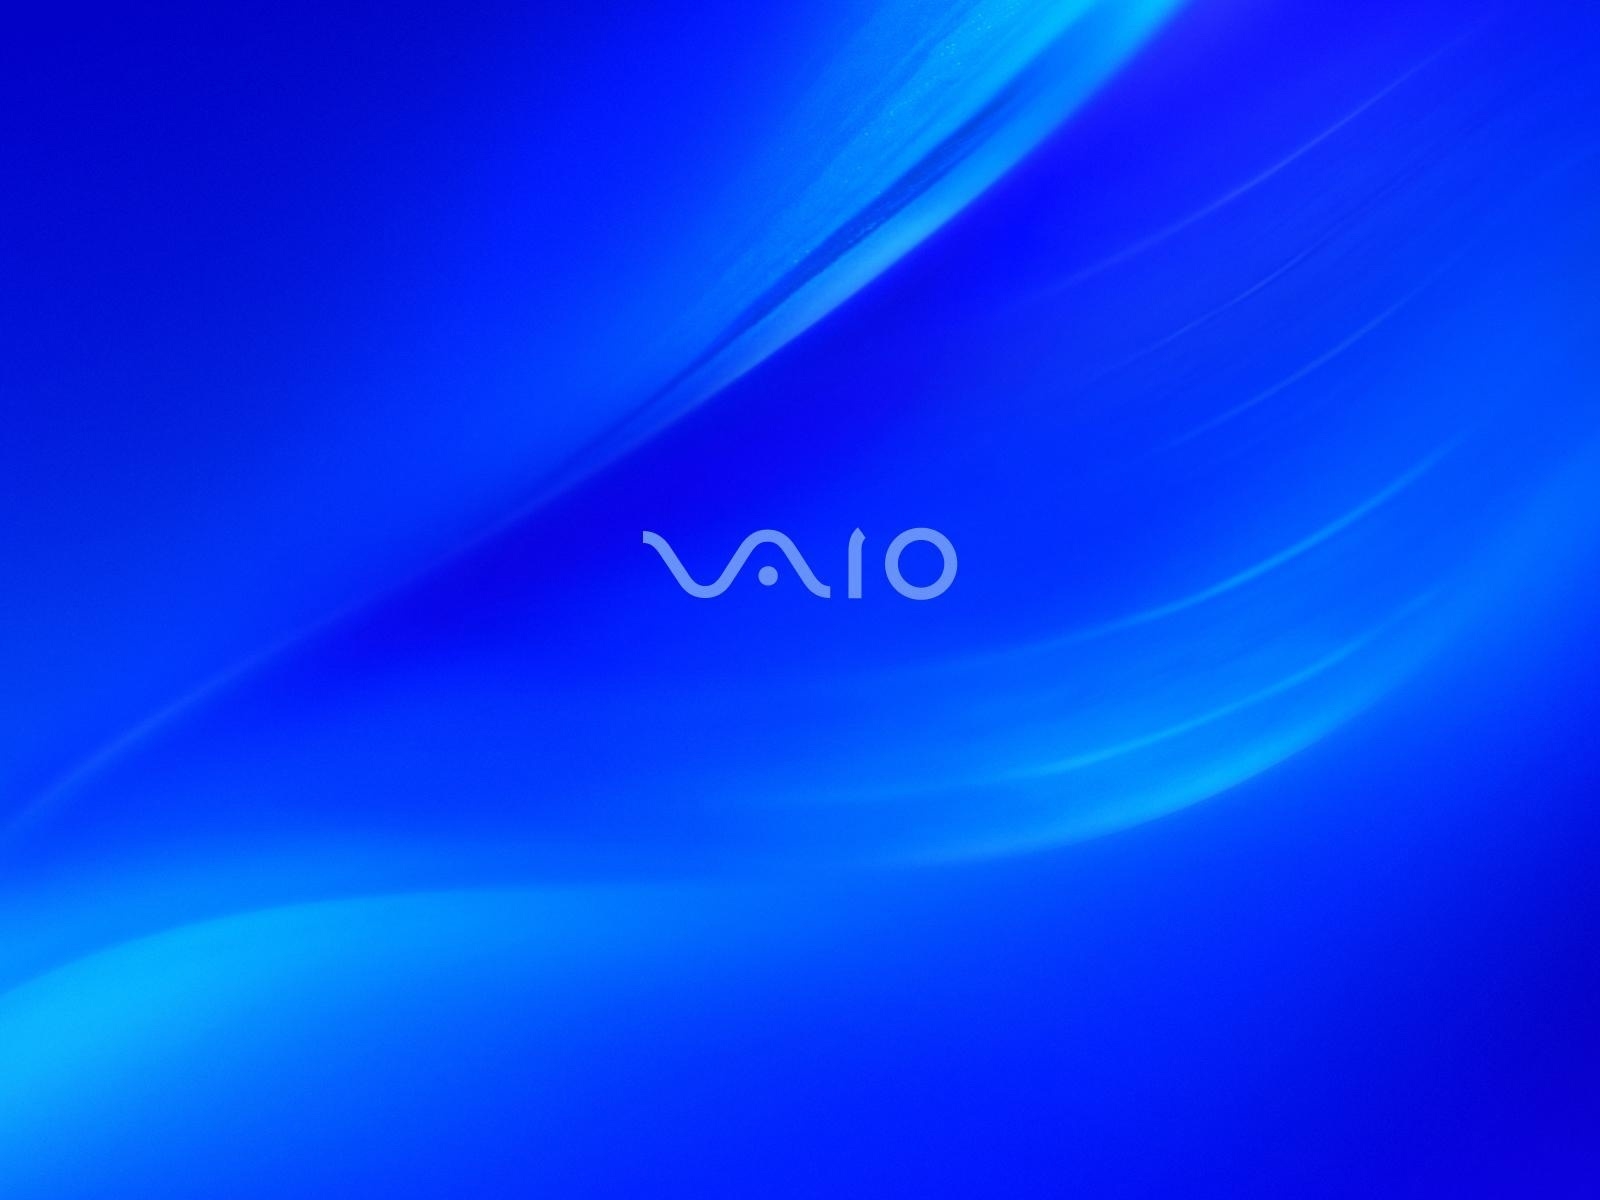 Sony Blue Vaio breeze for 1600 x 1200 resolution